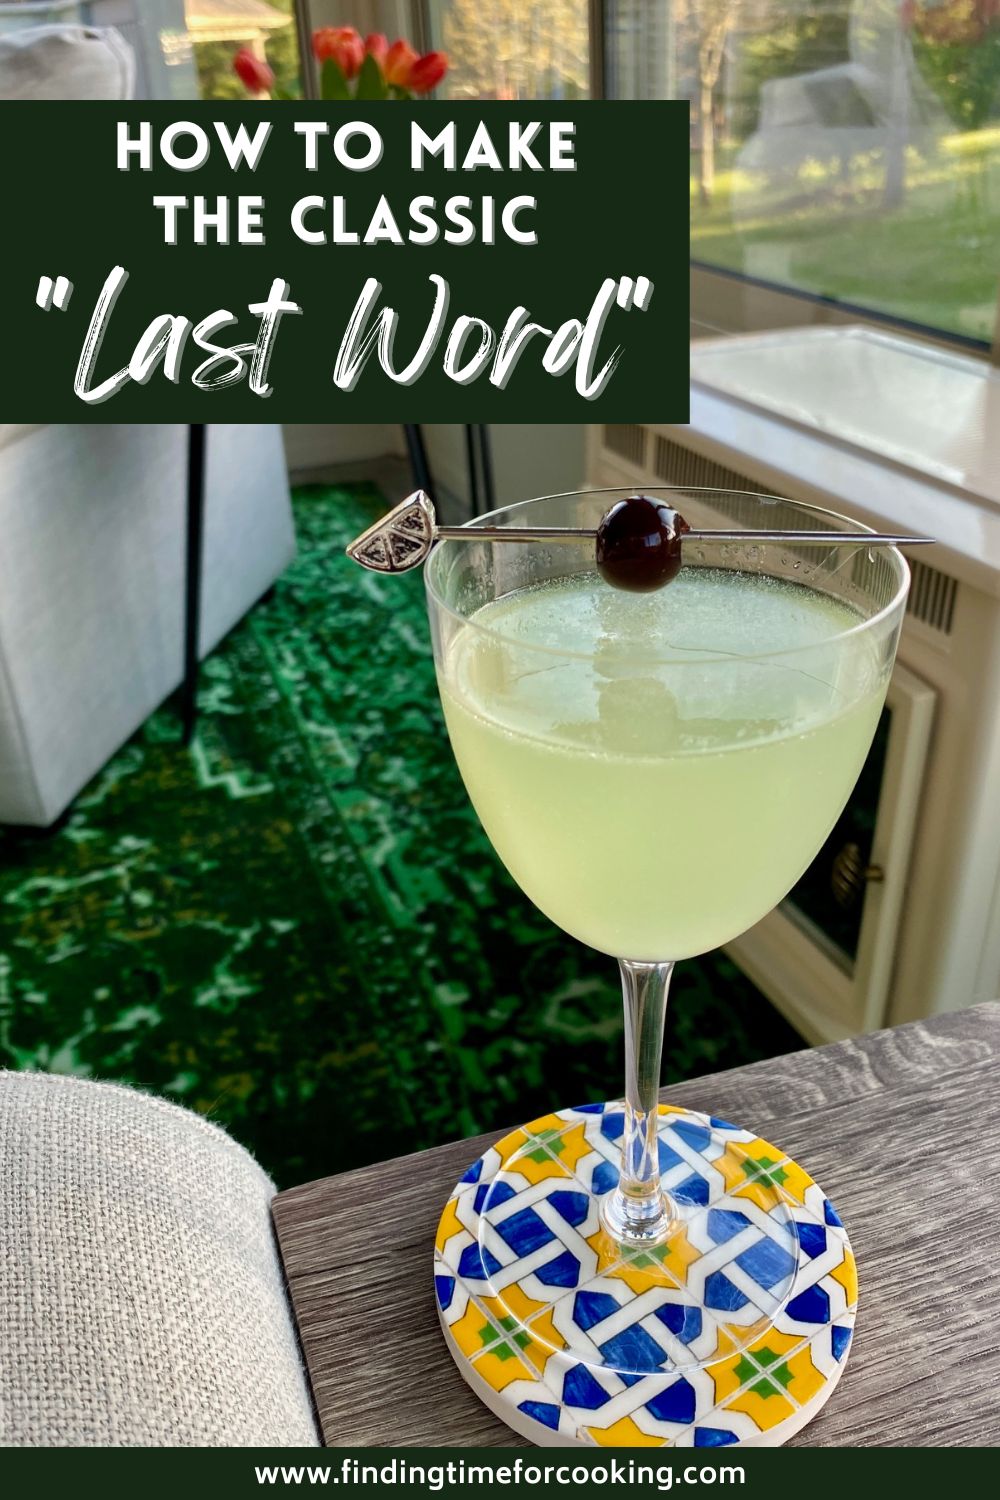 How to Make a "Last Word" Cocktail | The Last Word is a classic gin cocktail from the Prohibition era, made with gin, Luxardo maraschino liqueur, green chartreuse, & lime juice. An easy cocktail, perfect cocktail for fall or any season. Fall drink ideas, classic cocktail recipes. #lastword #cocktail #drinkrecipe #gin